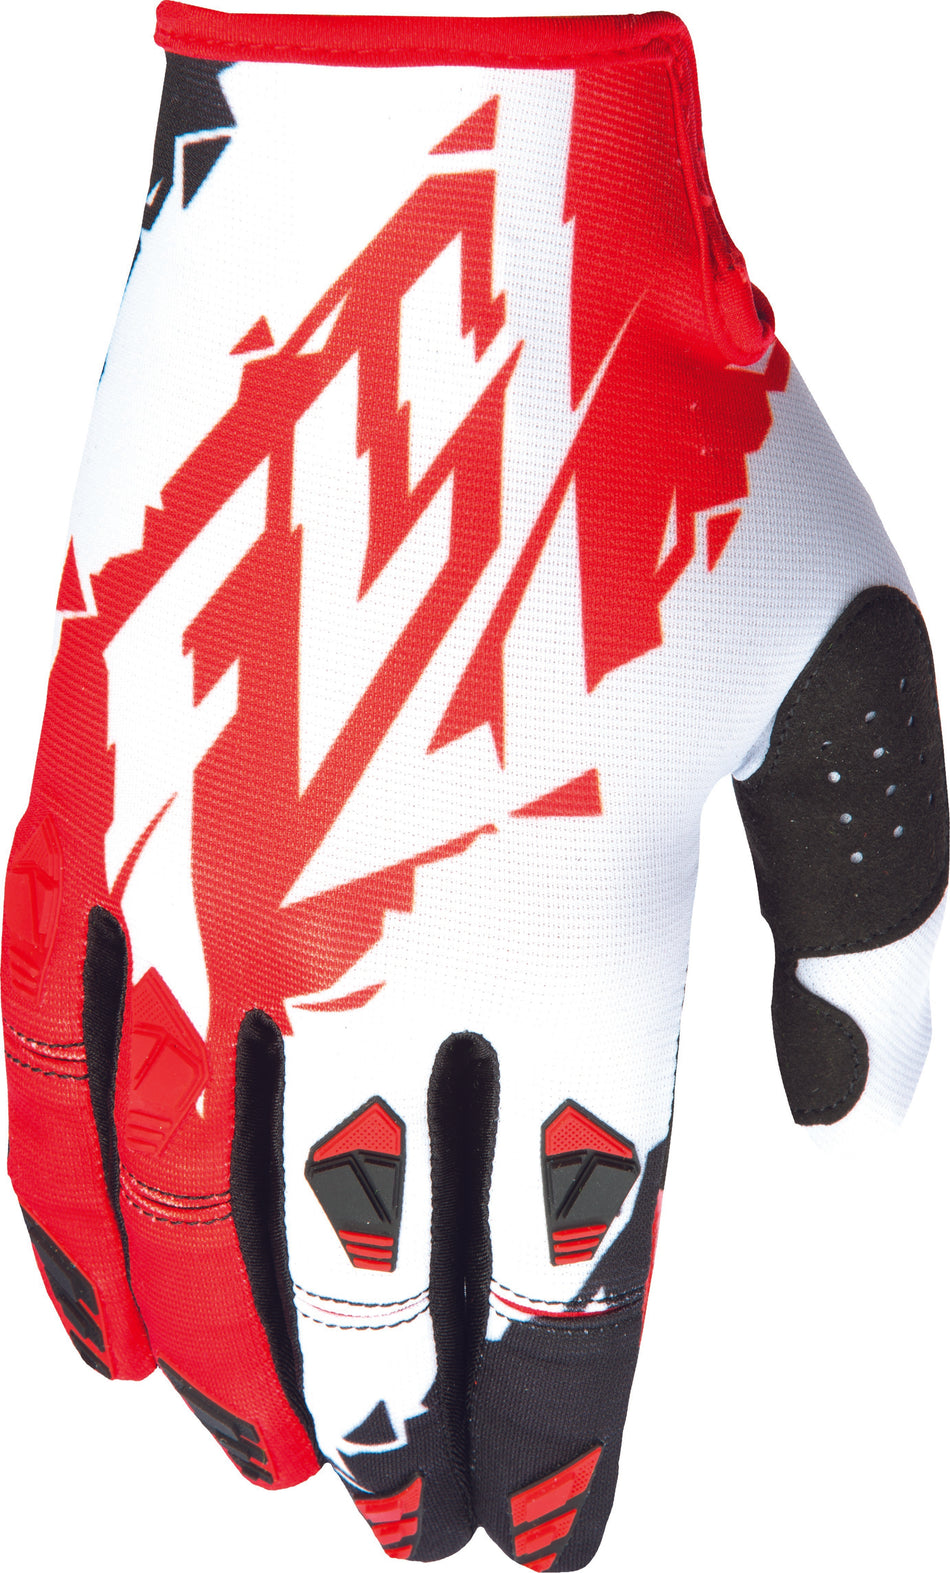 FLY RACING Kinetic Glove Red/White Sz 10 L 370-41410